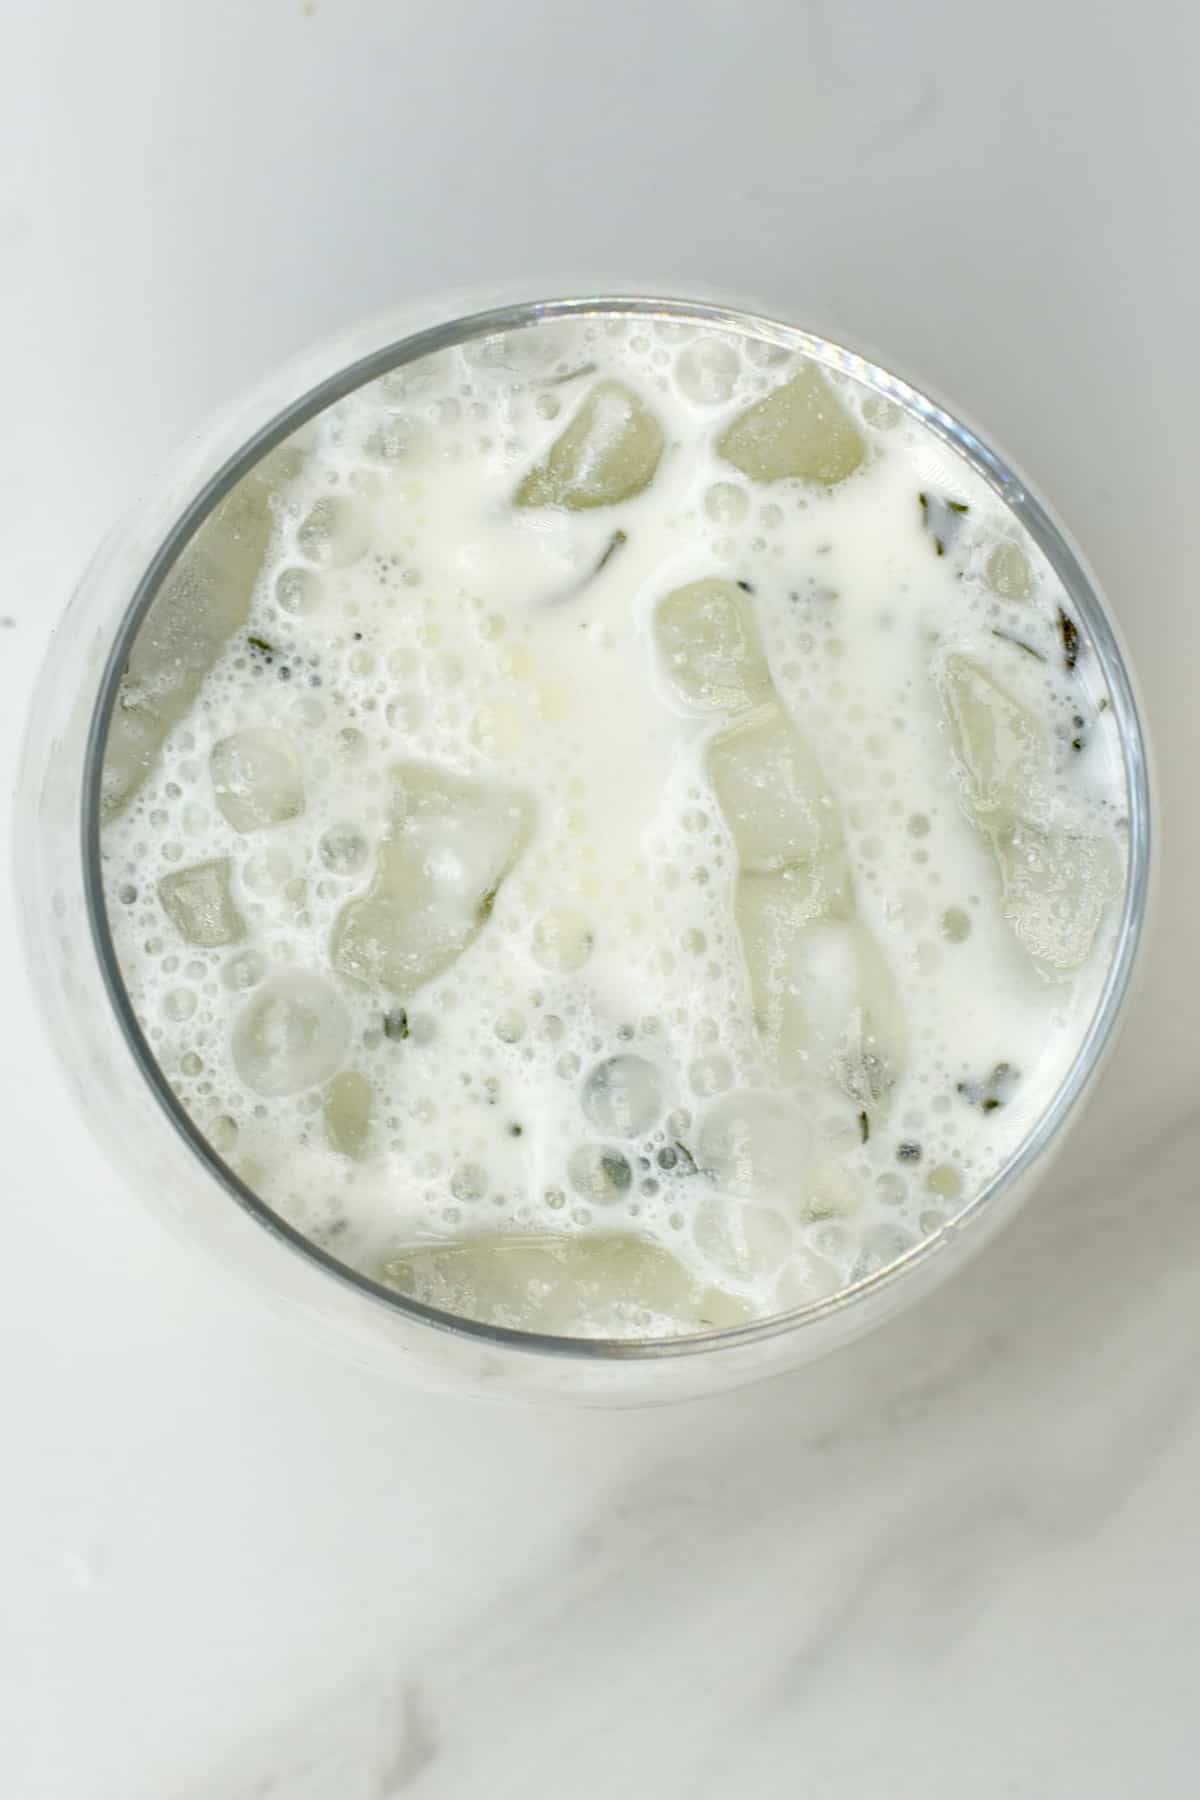 Ayran with ice cubes in a glass - also called doogh